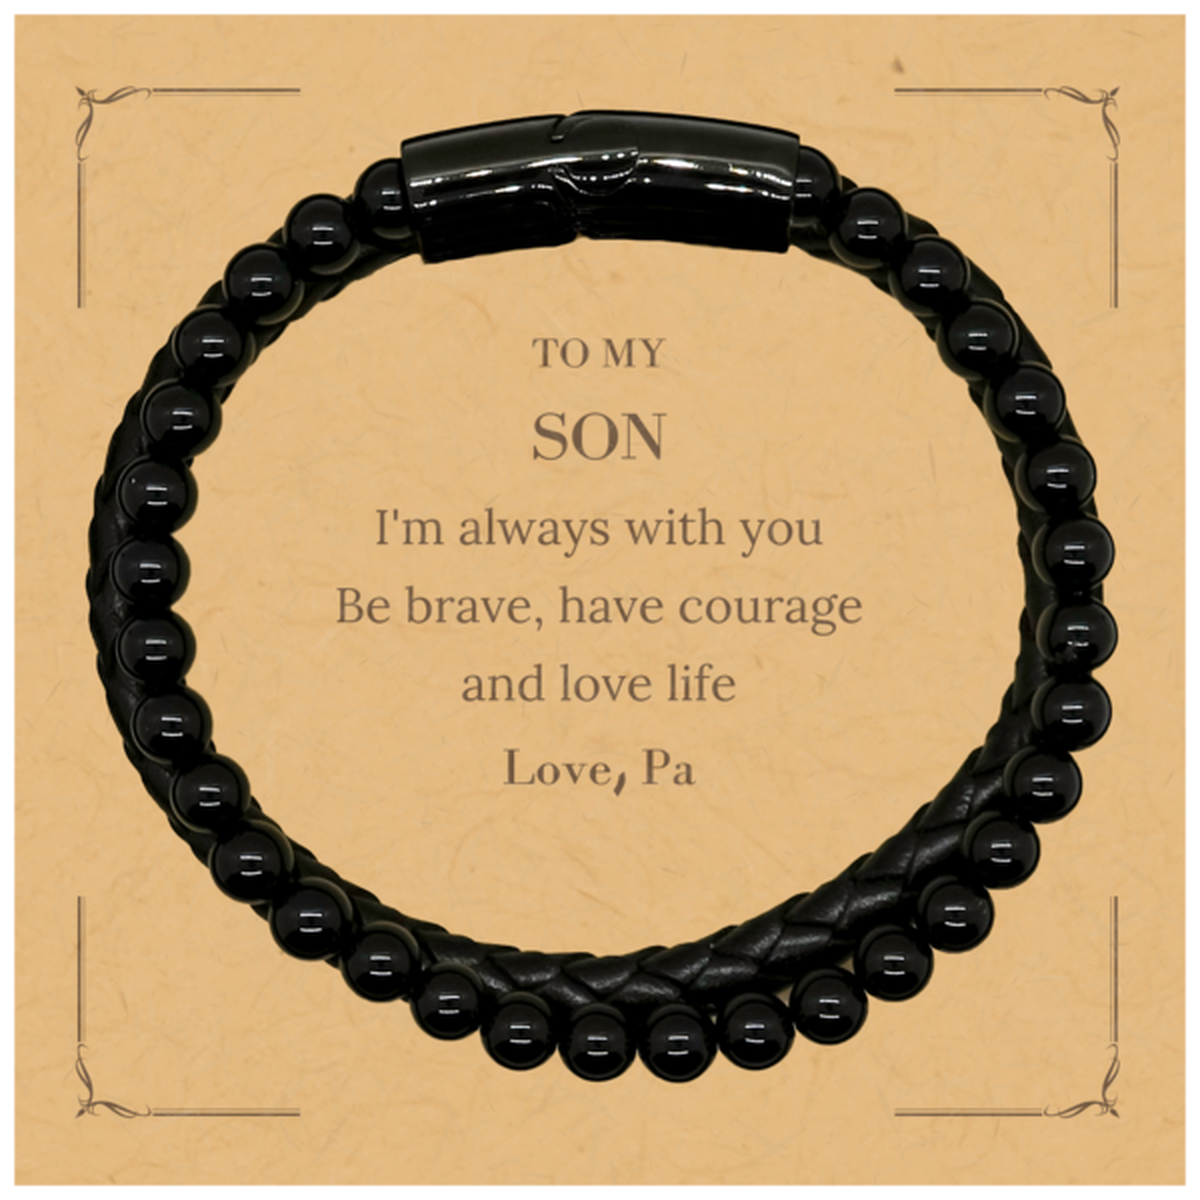 To My Son Gifts from Pa, Unique Stone Leather Bracelets Inspirational Christmas Birthday Graduation Gifts for Son I'm always with you. Be brave, have courage and love life. Love, Pa